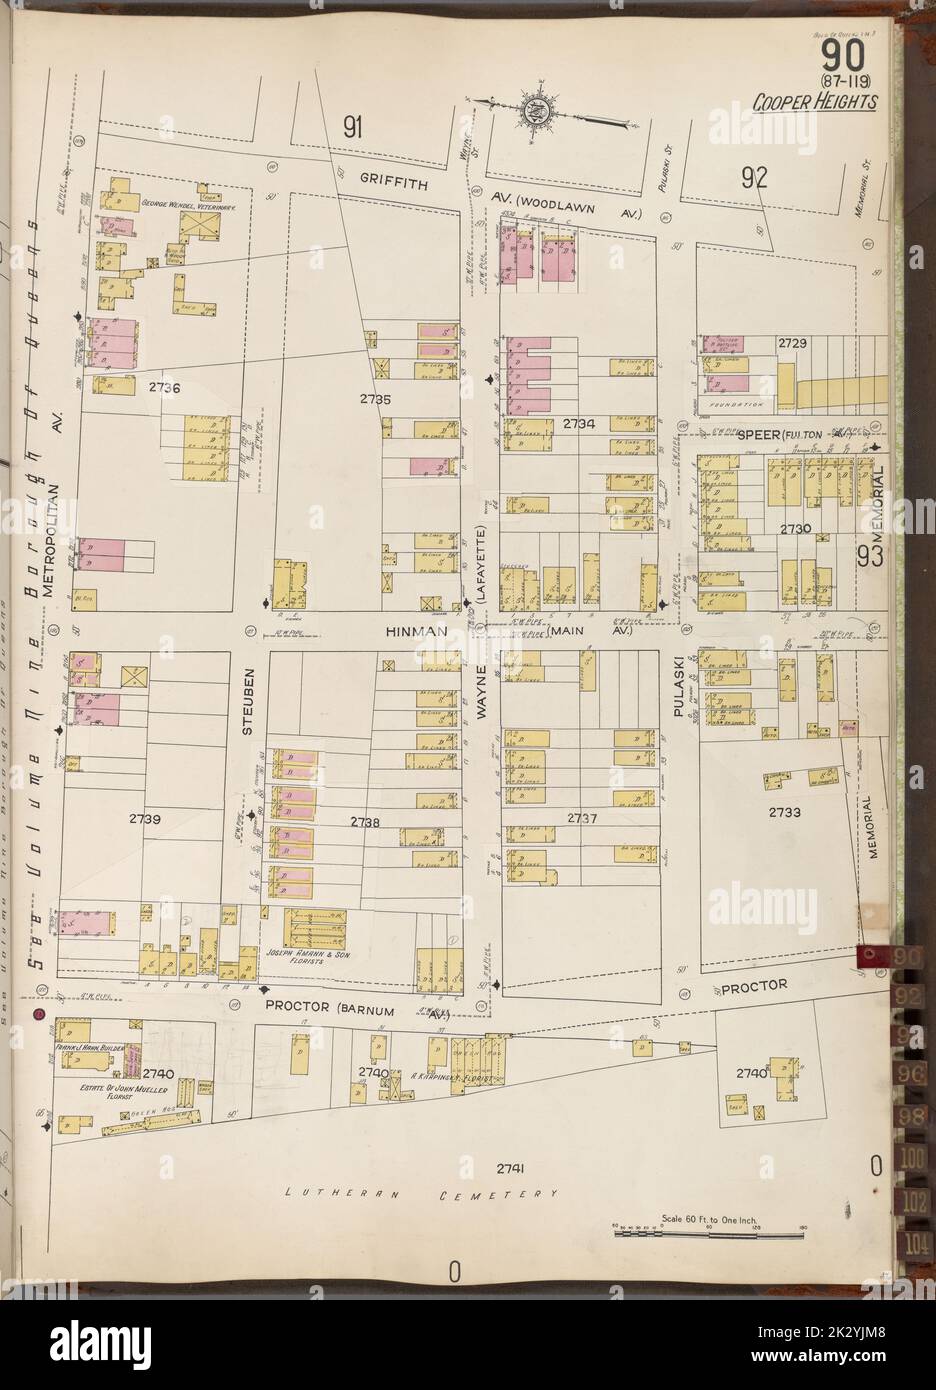 Cartographic, Maps. 1884 - 1936. Lionel Pincus and Princess Firyal Map Division. Fire insurance , New York (State), Real property , New York (State), Cities & towns , New York (State) Queens V. 3, Plate No. 90 Map bounded by Griffith Ave., Memorial, Proctor, Metropolitan Ave. Stock Photo